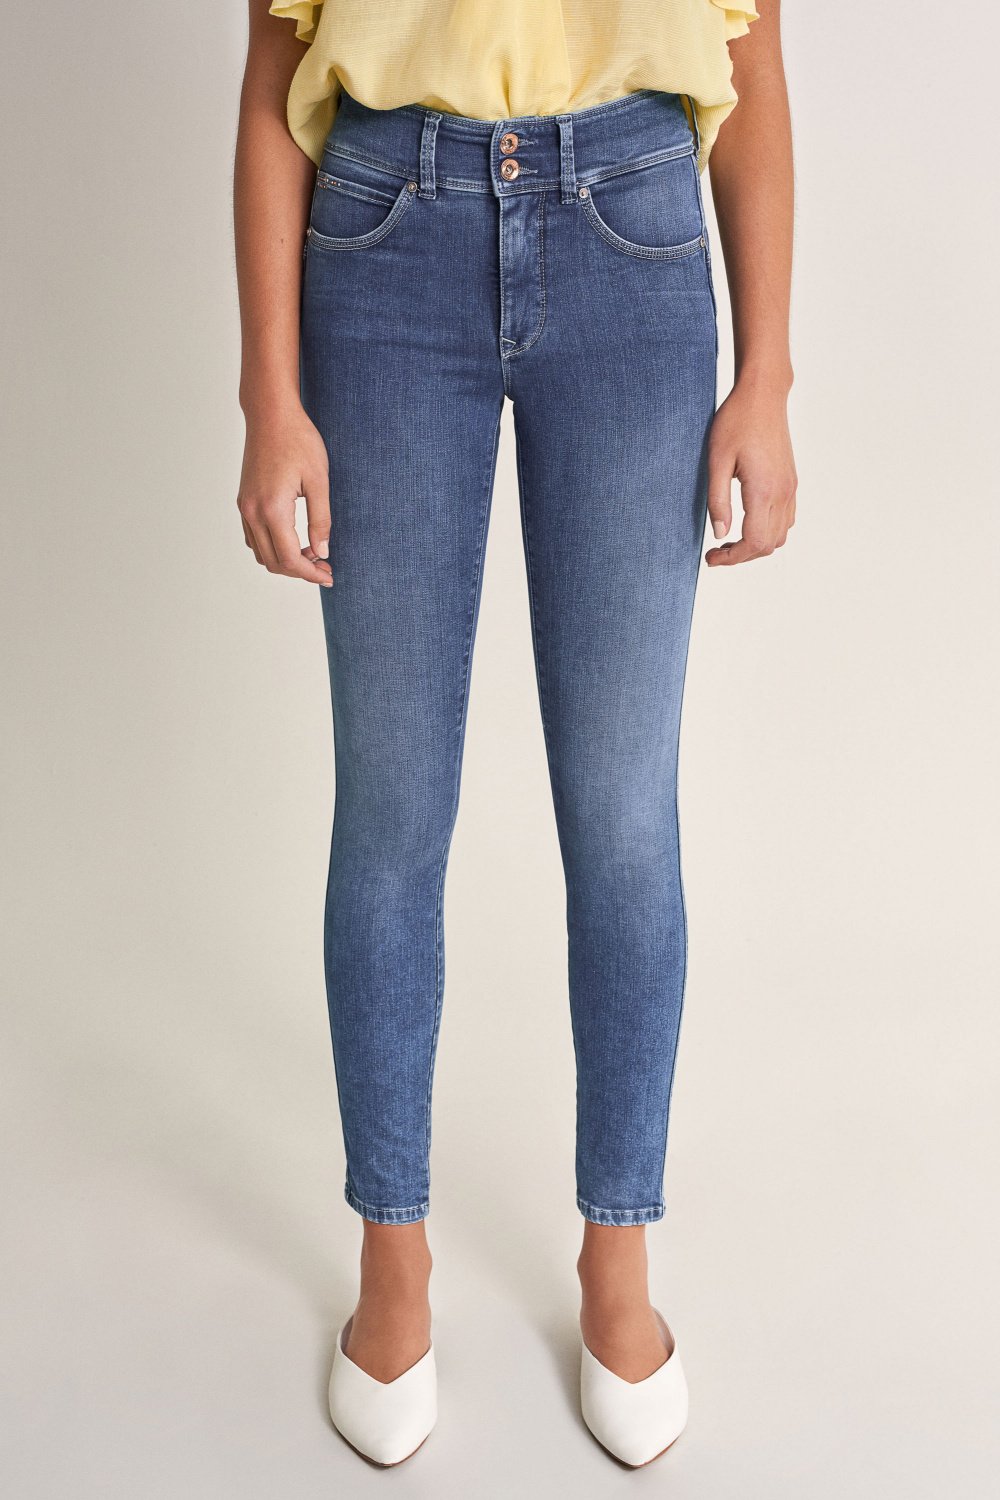 Salsa Jeans | Push in Secret soft touch skinny jeans with stitching details